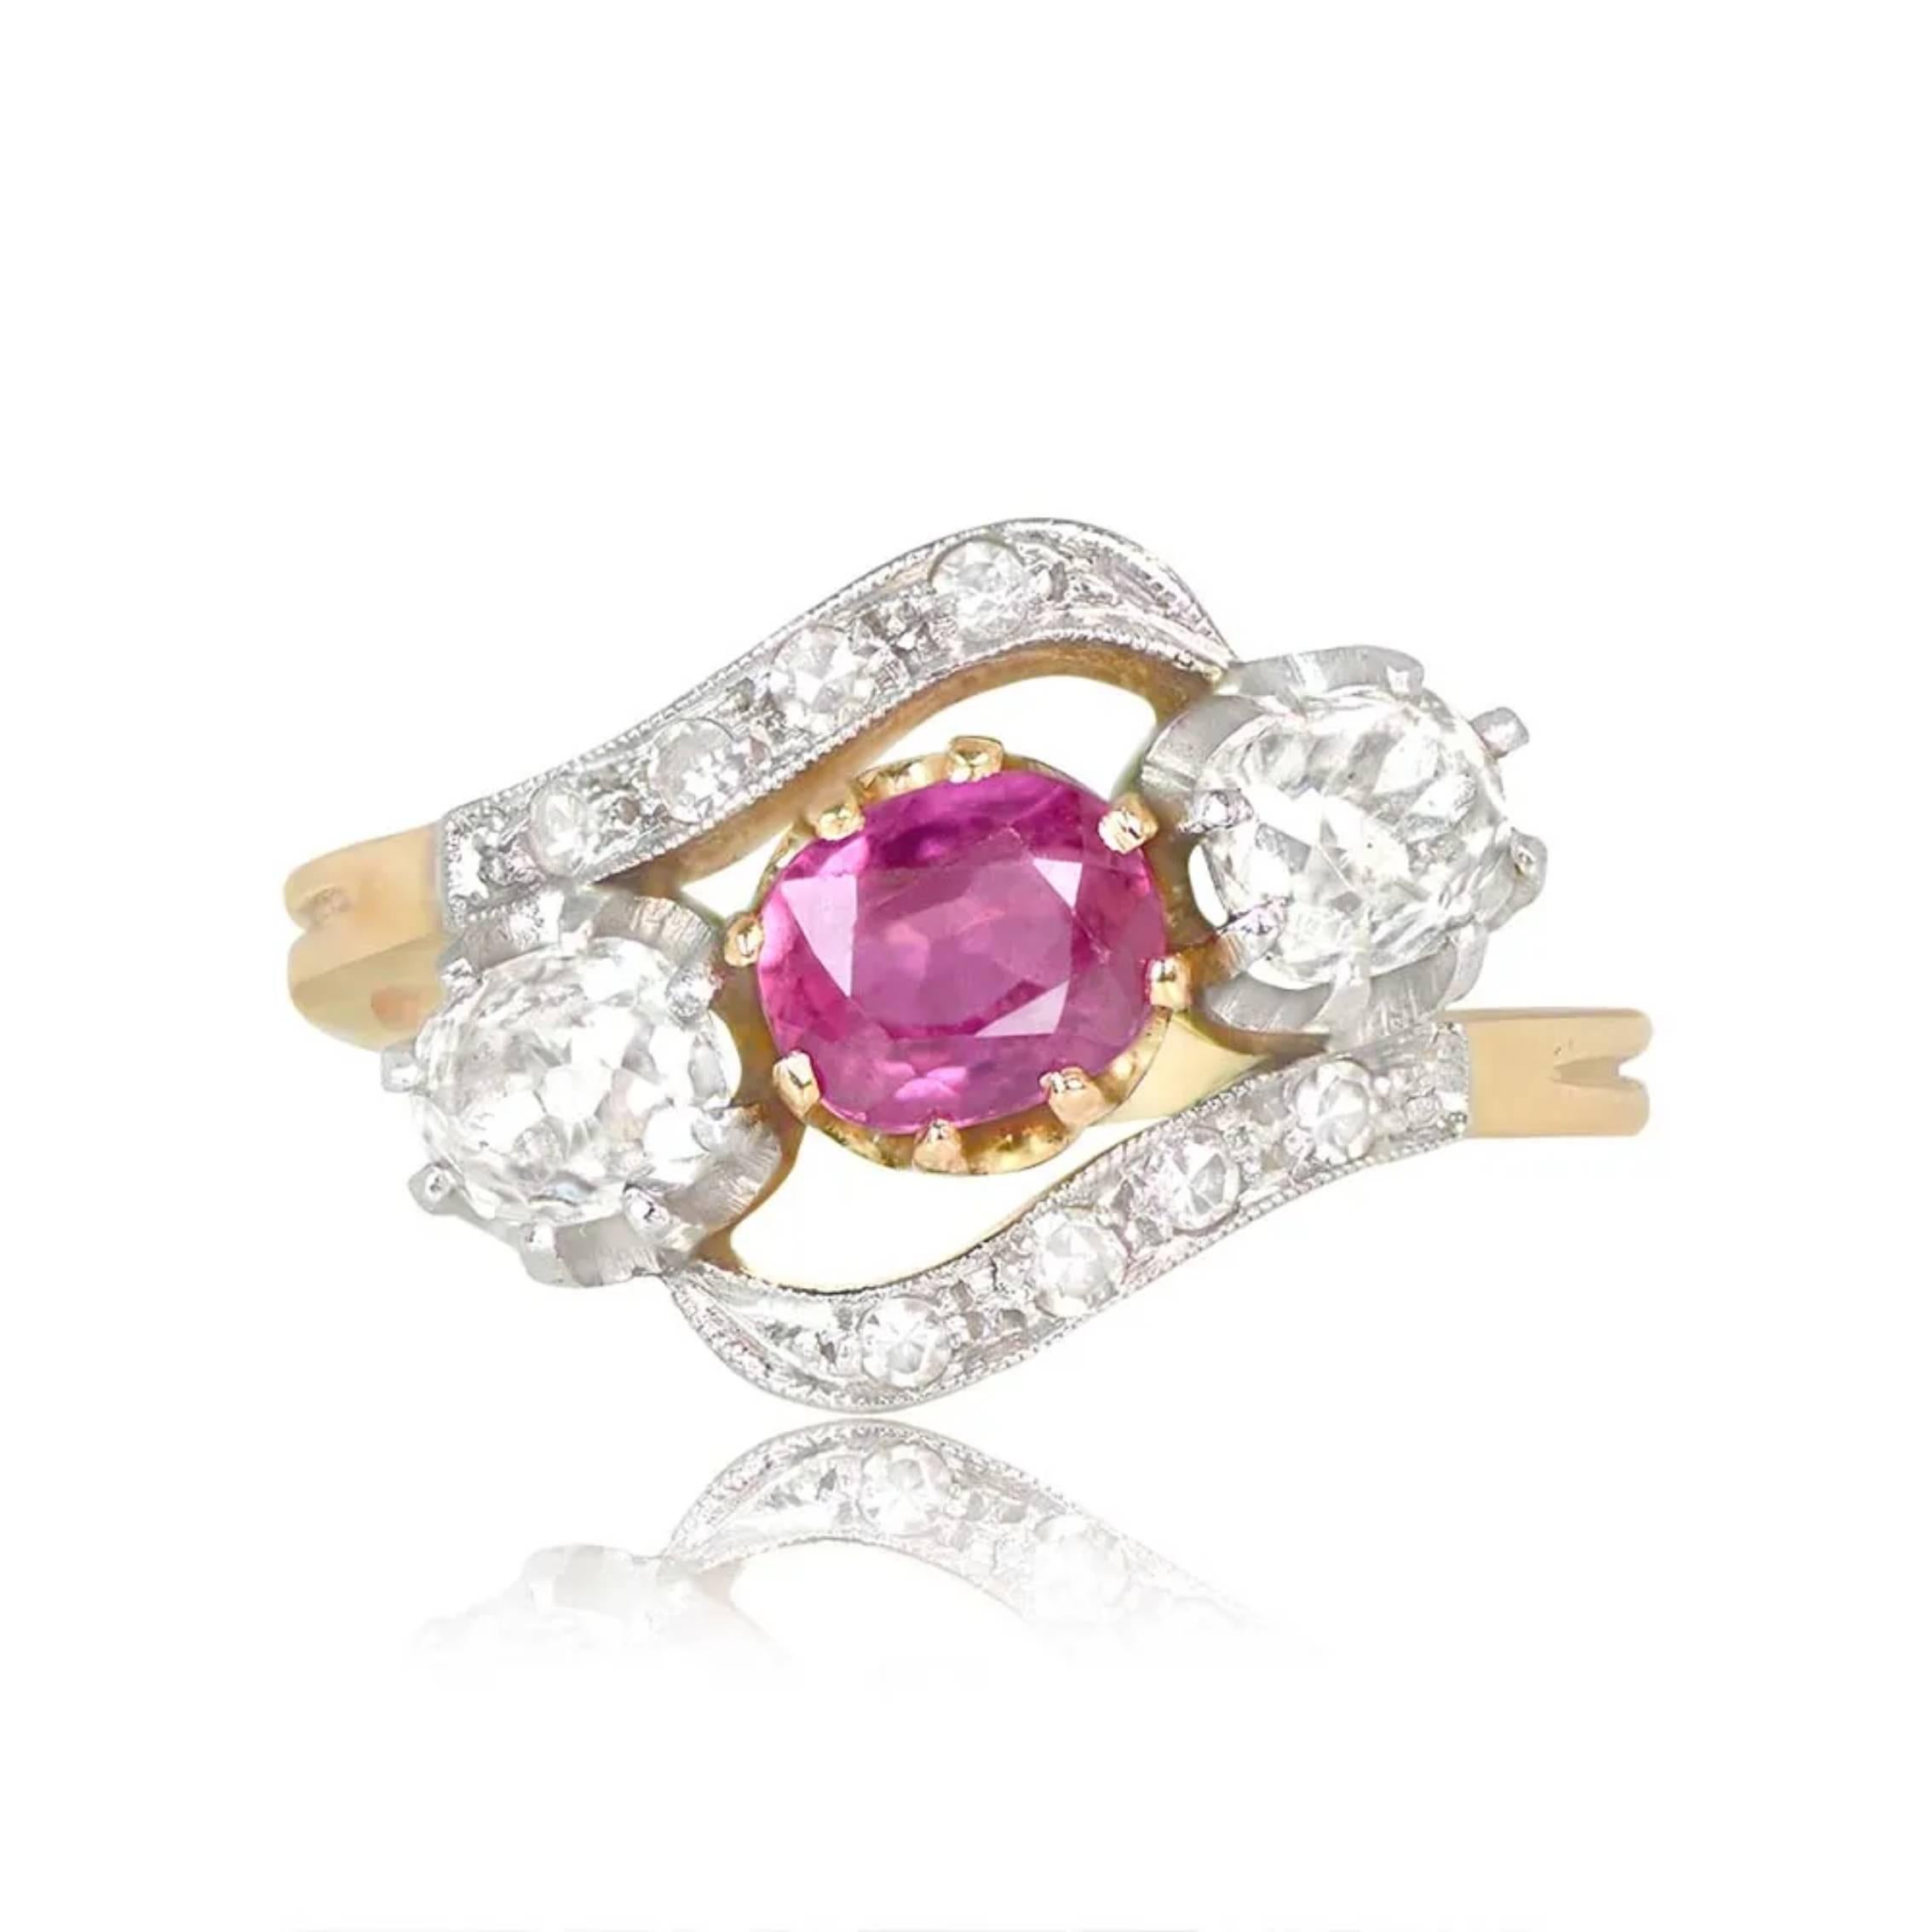 This original Edwardian-era ring showcases a unique design with three three-stone prong sets on an angle. The center stone is a stunning antique cushion-cut natural ruby, weighing approximately 0.75 carats, adding a touch of rich red elegance.